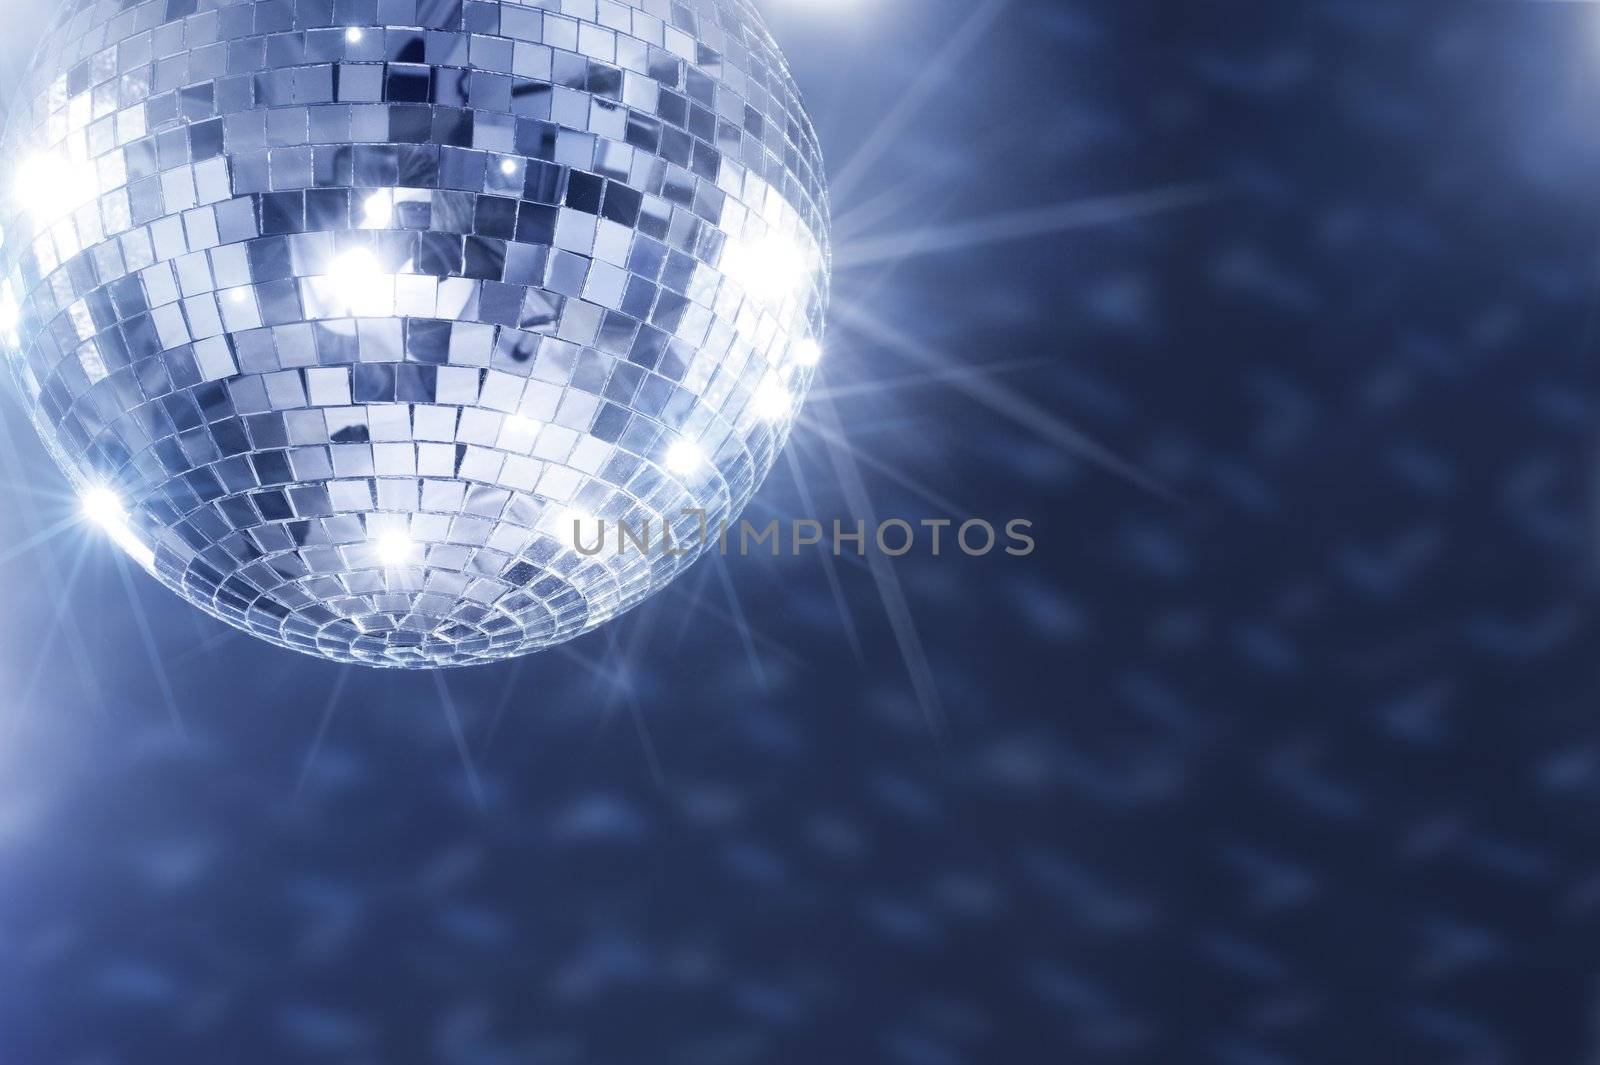 A Mirror disco ball hanging from the ceiling.